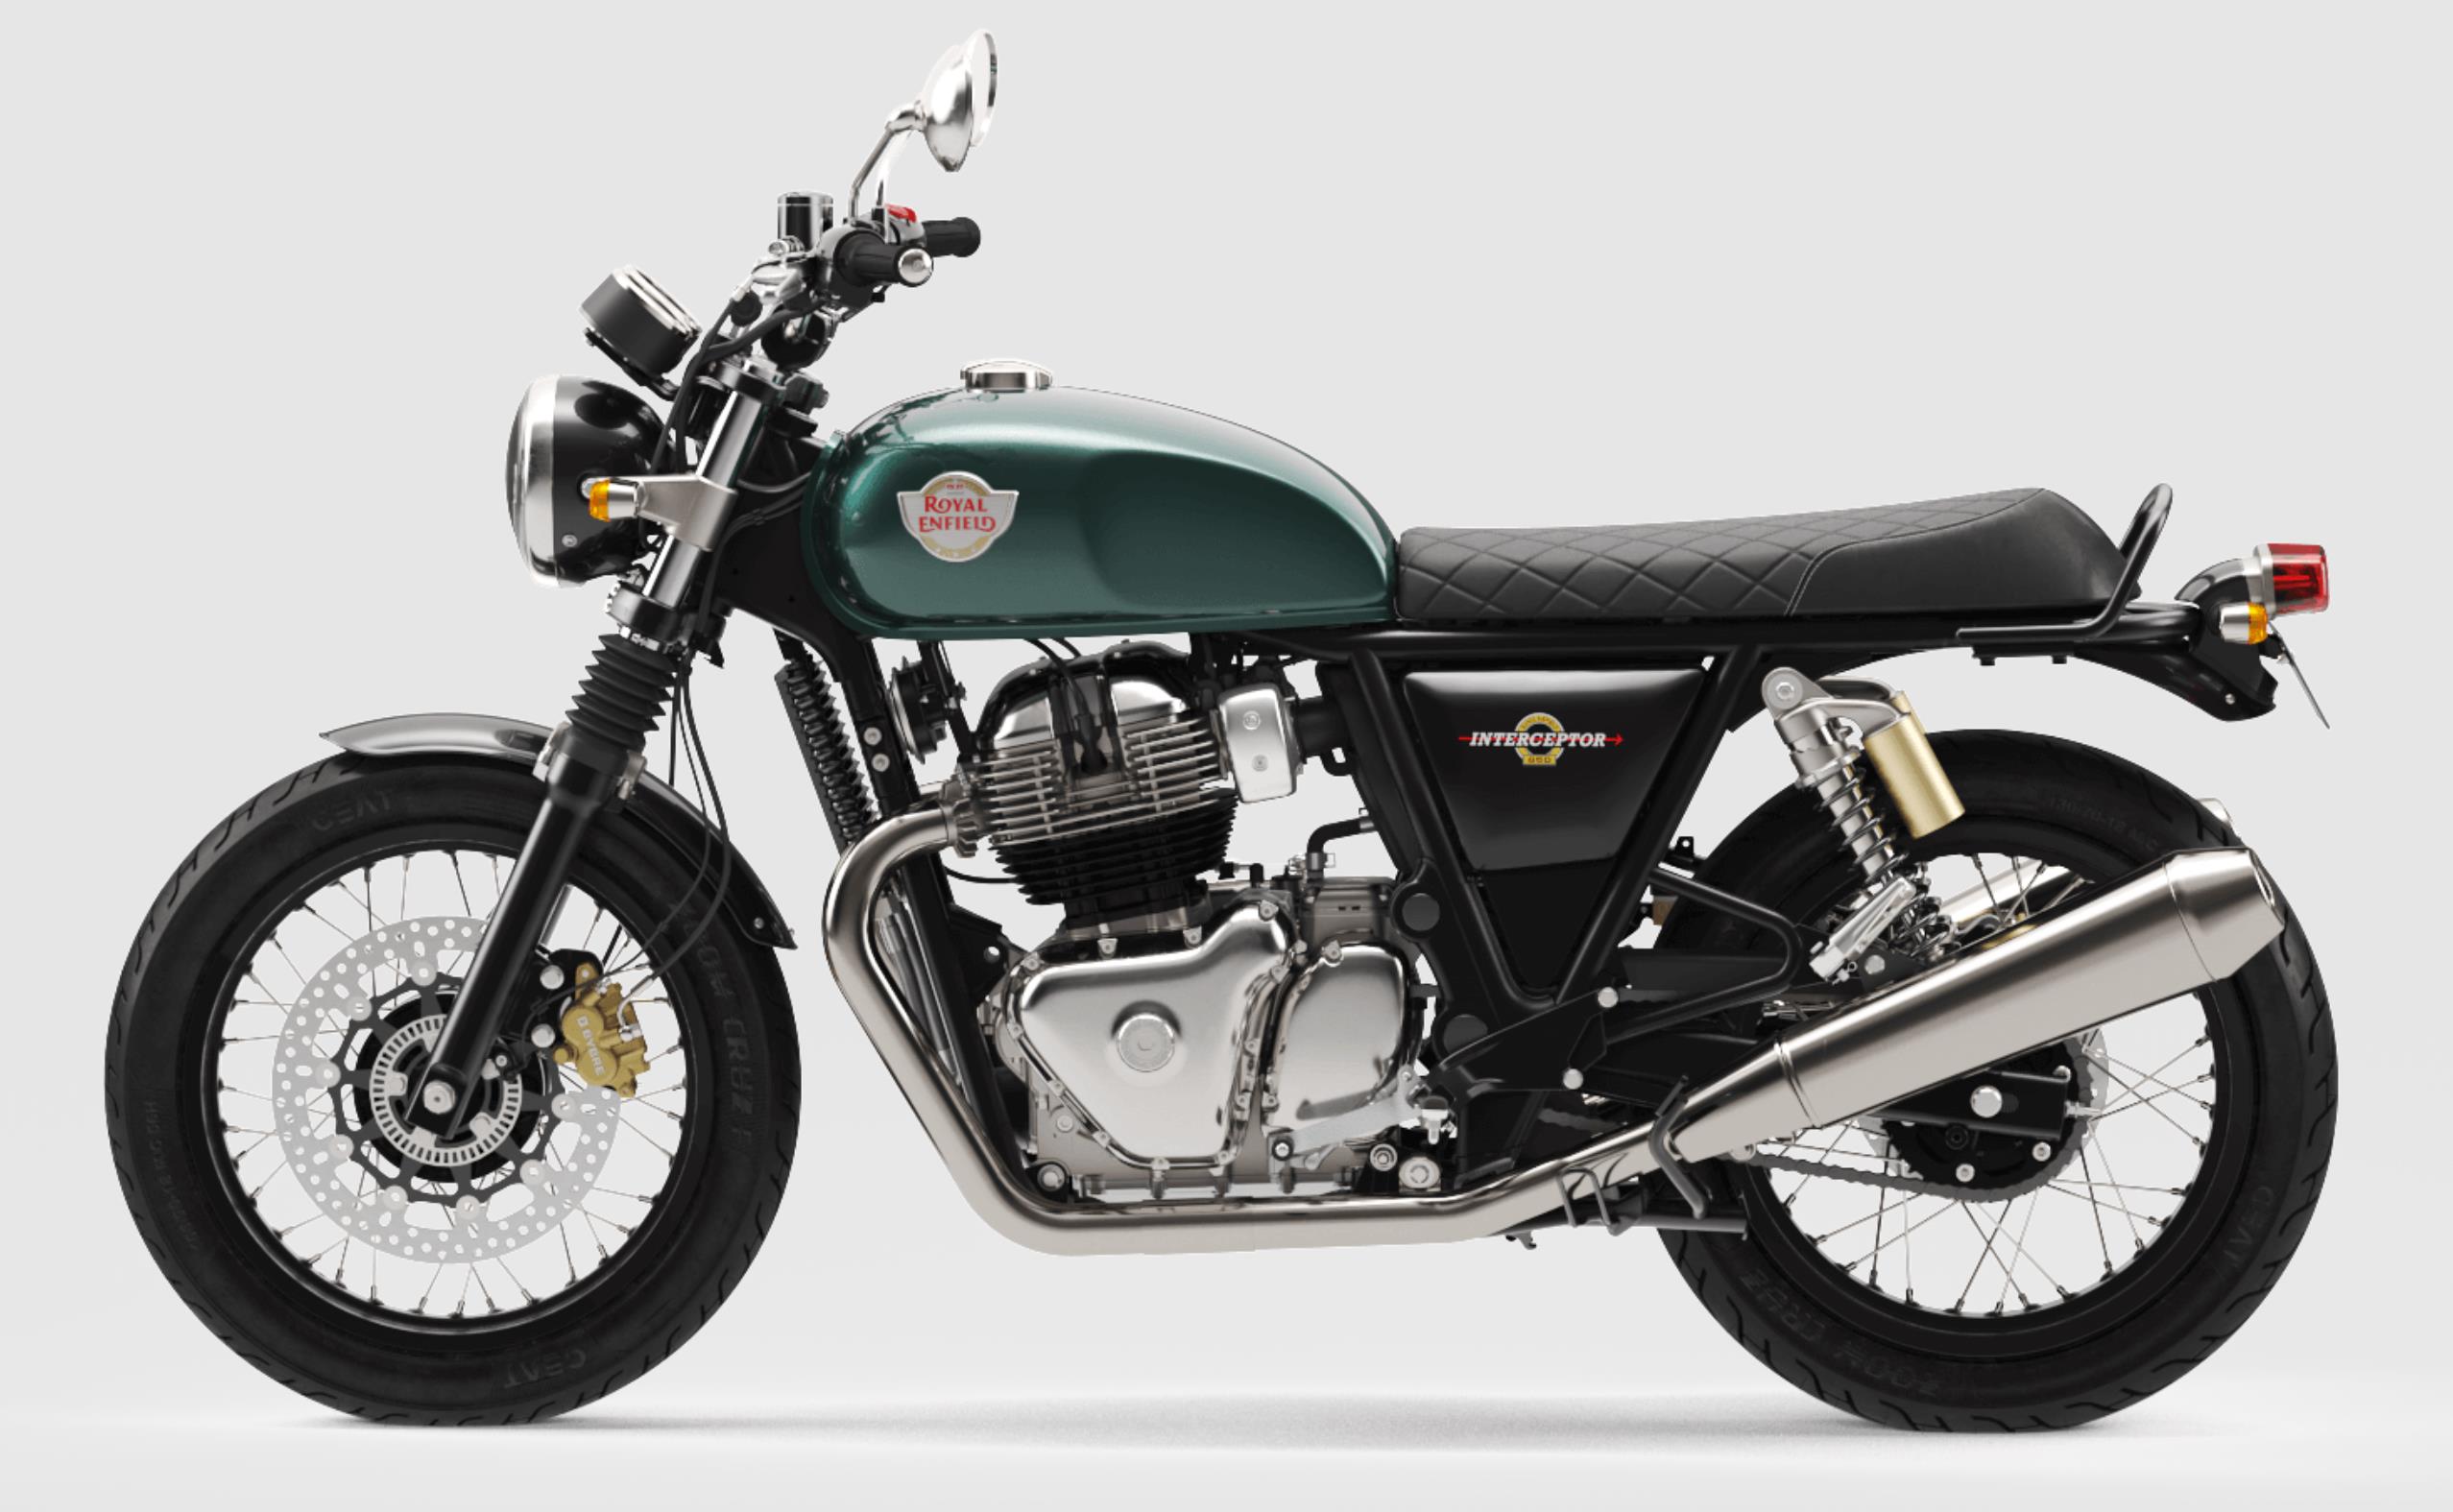 Royal Enfield Interceptor 650 Cali Green Price, Specs, Top Speed & Mileage in India